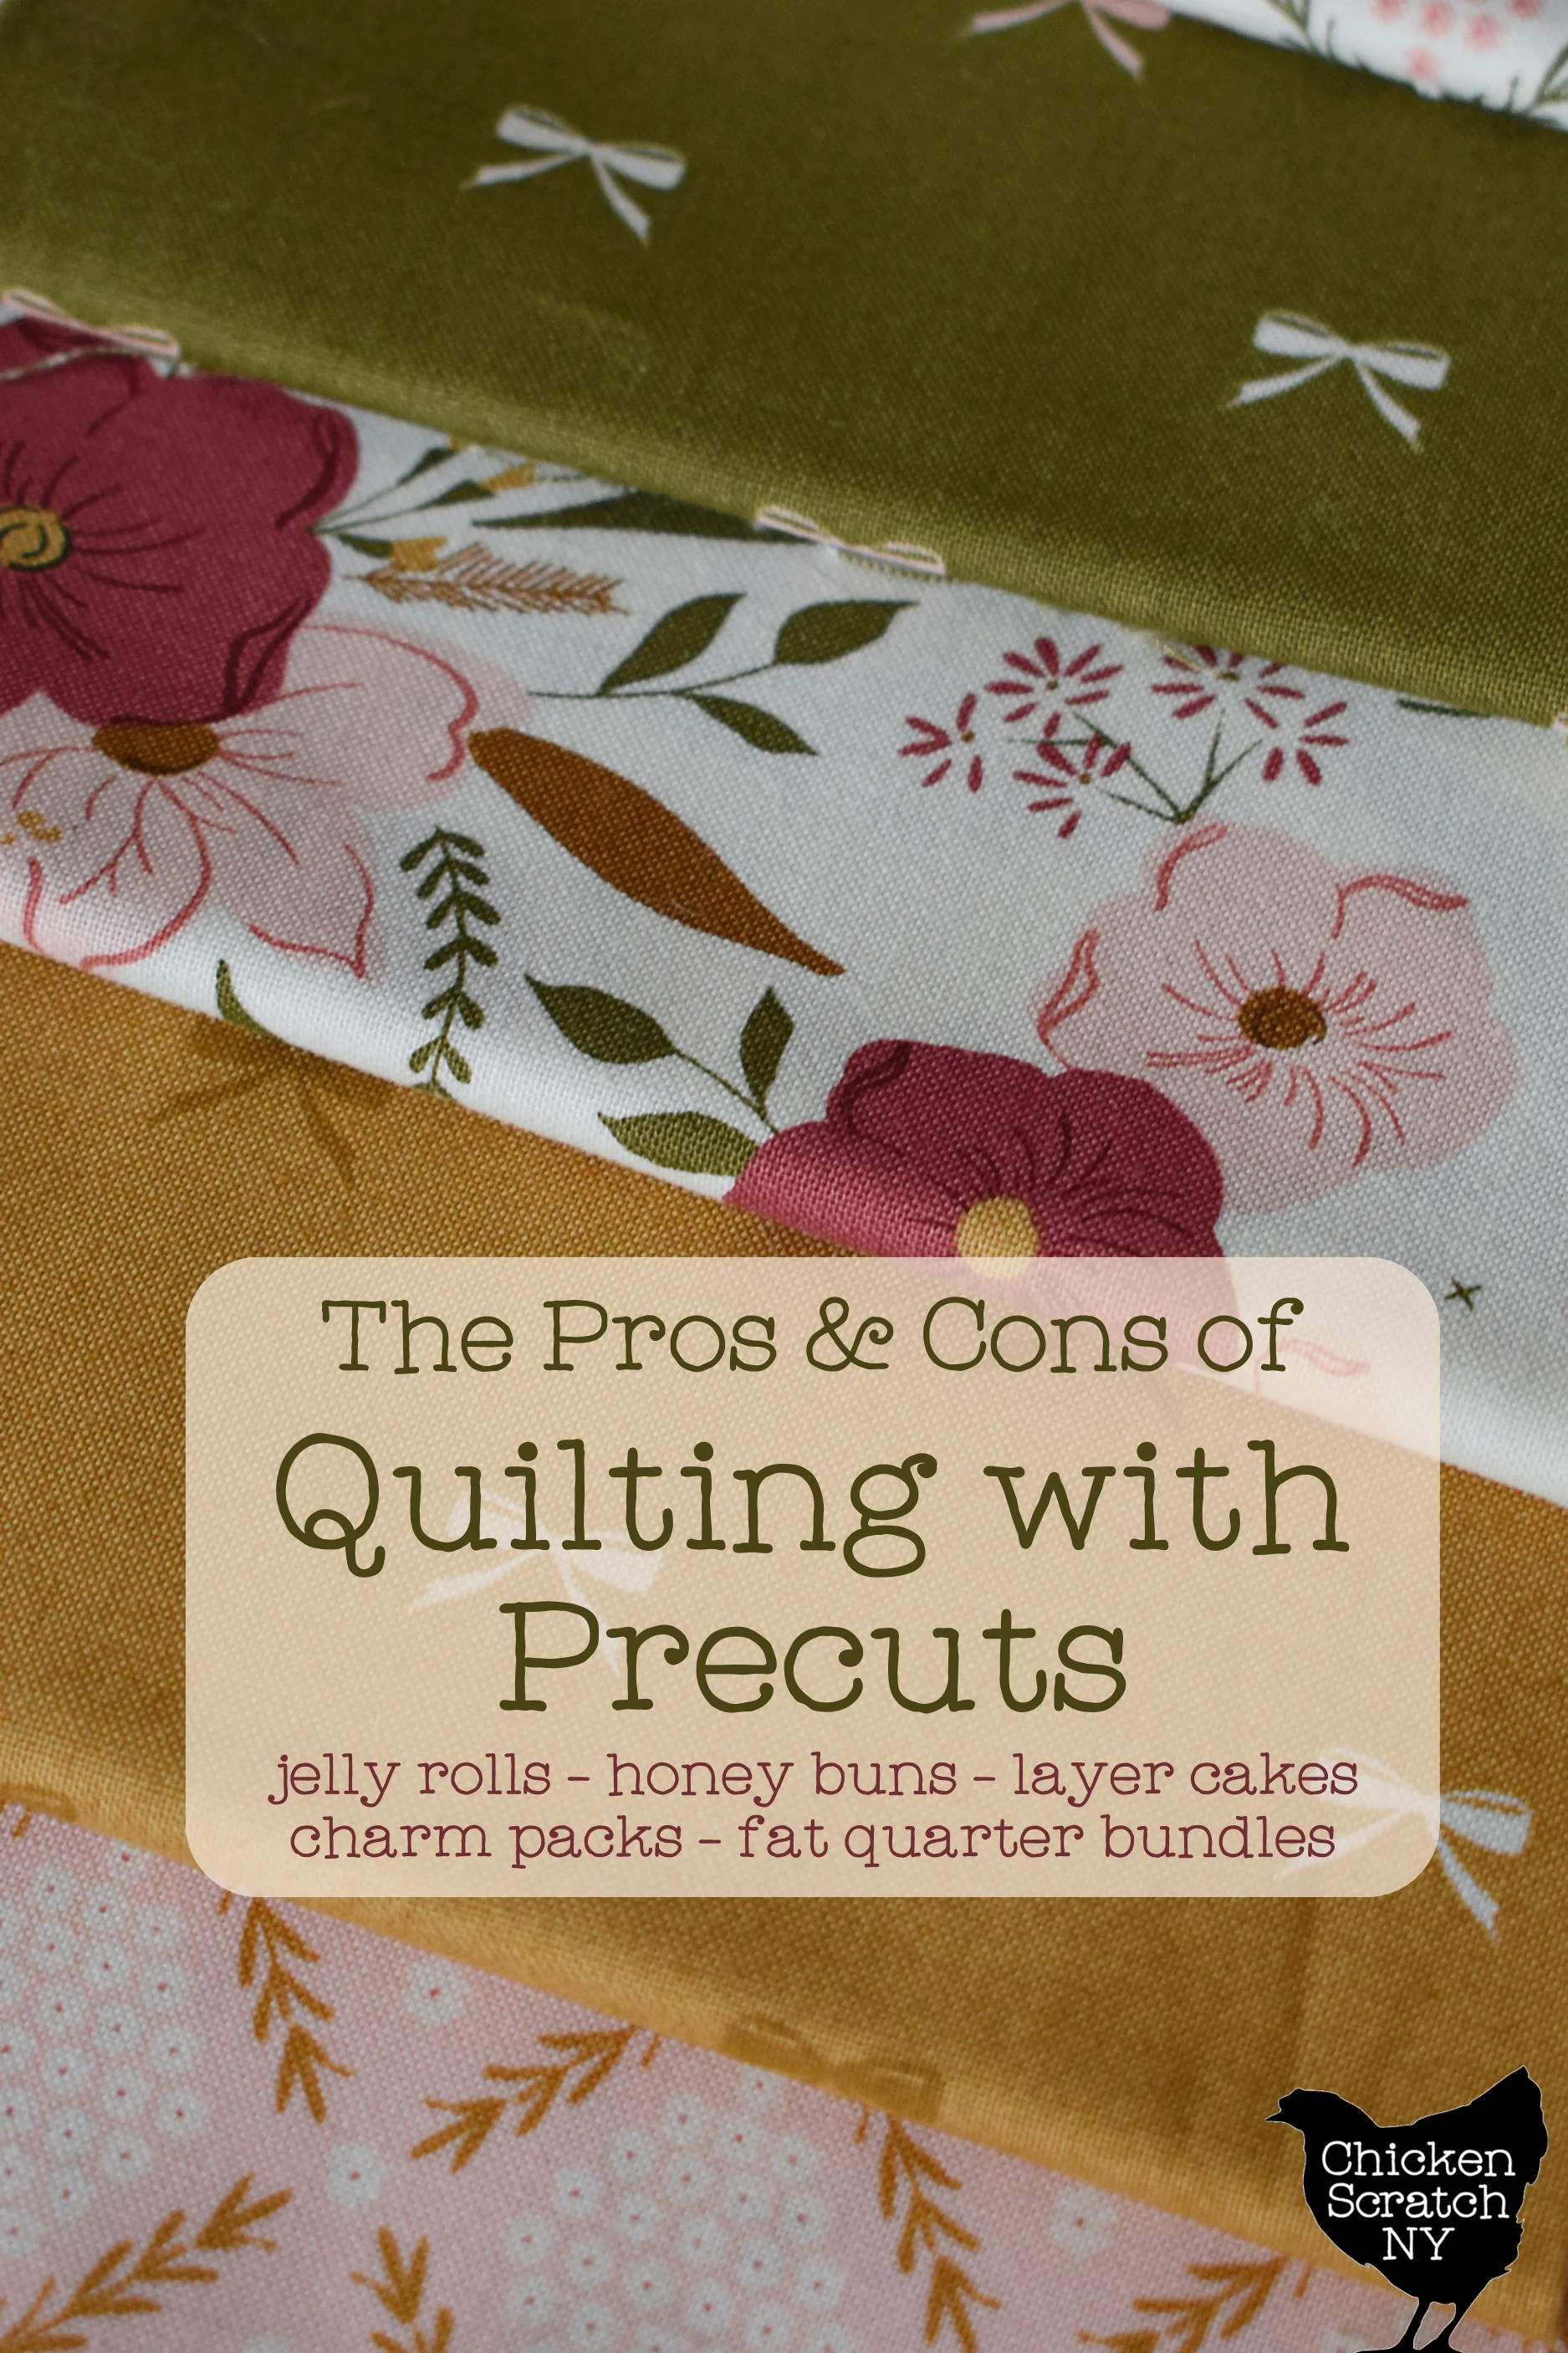 best place to buy jellyrolls? : r/quilting